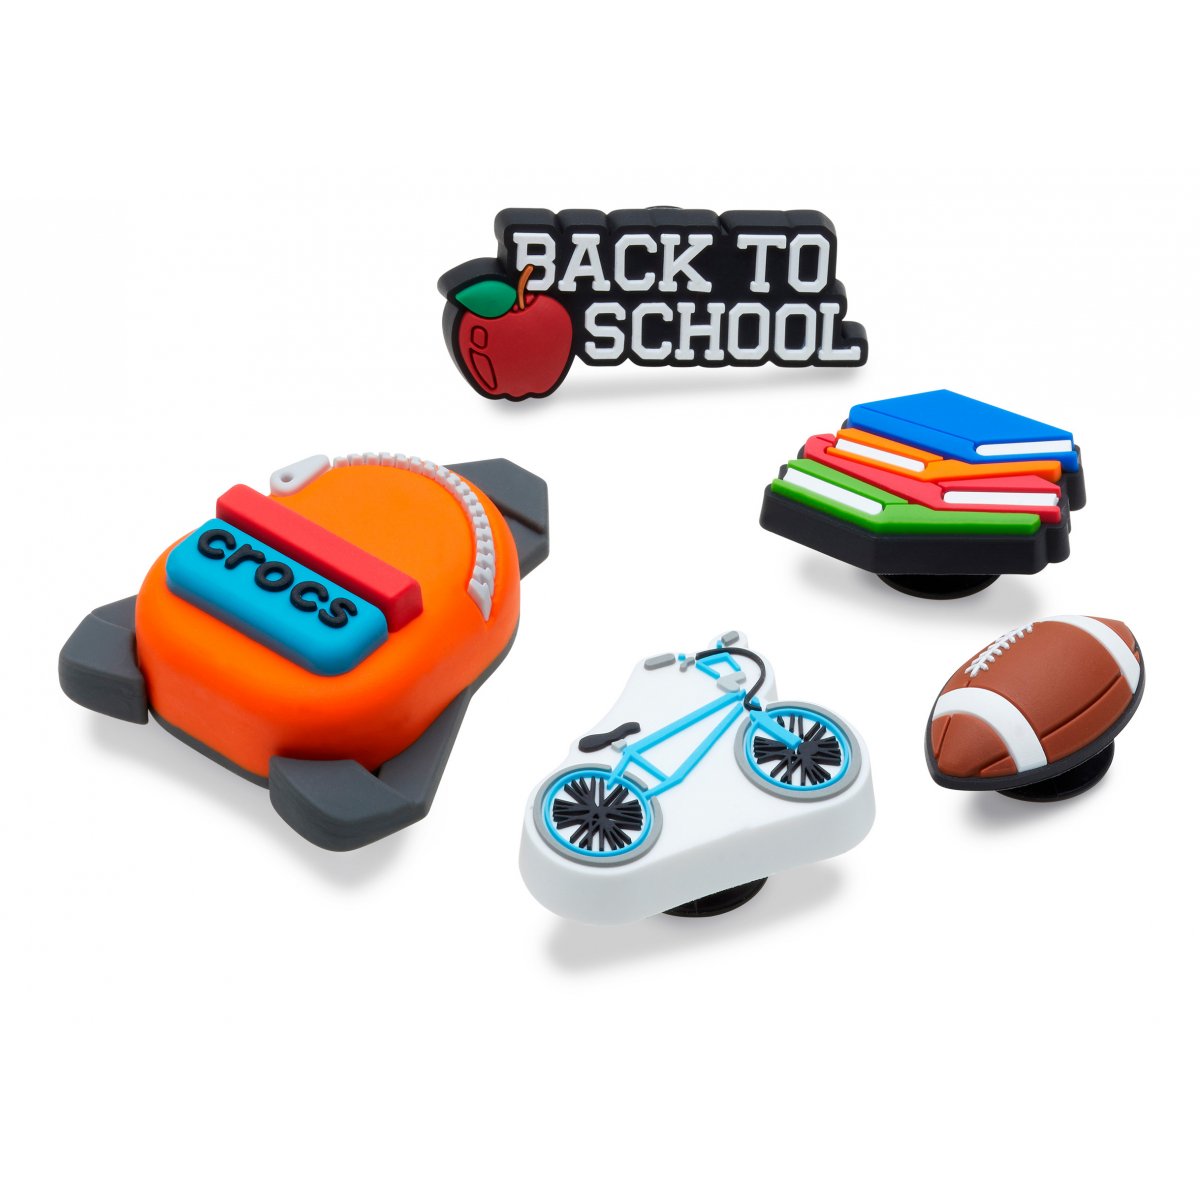 Back to school 5 pack